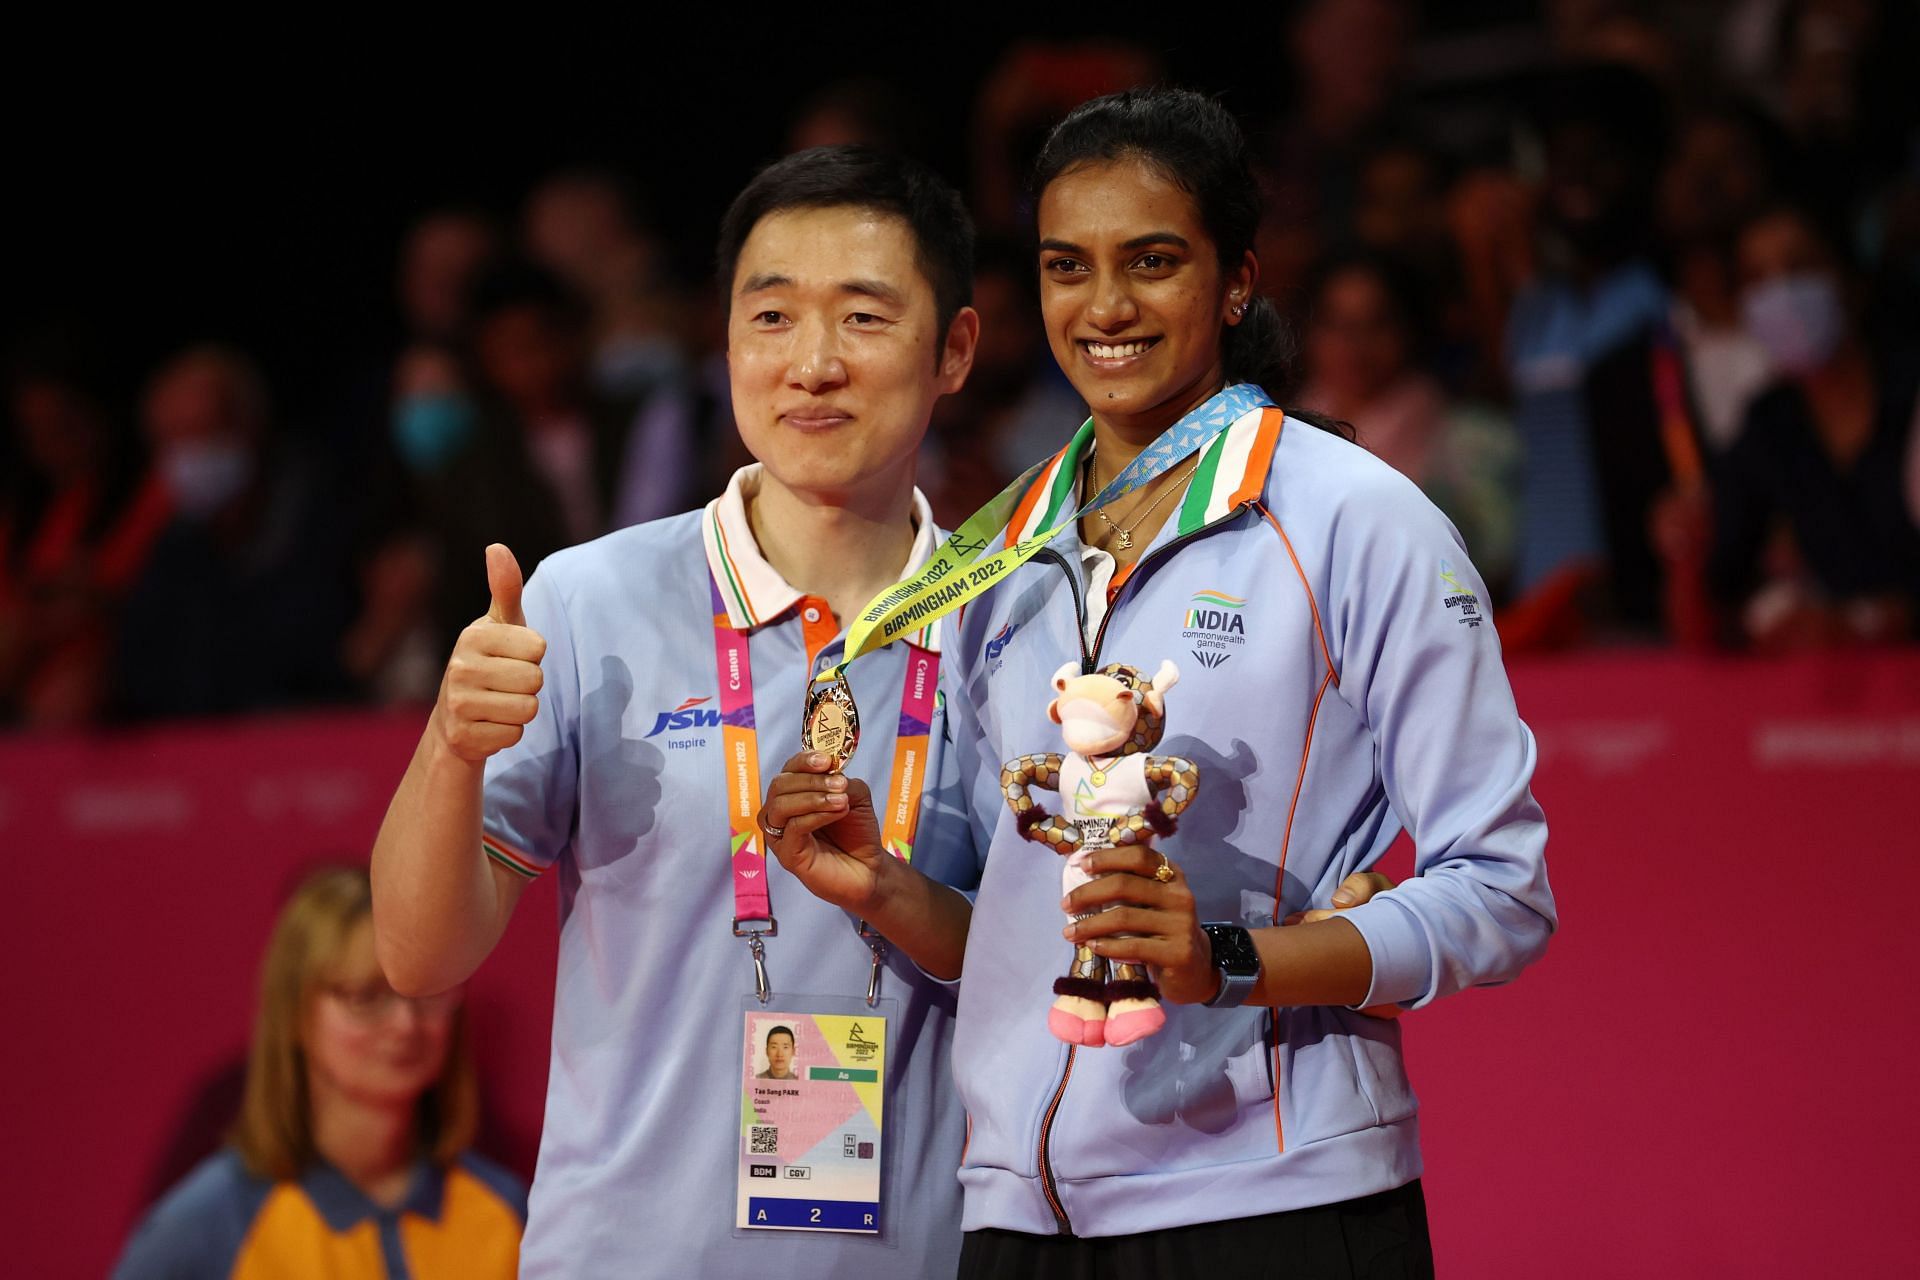 Sindhu (R) with her coach at the 2022 Commonwealth Games (Image: Getty)